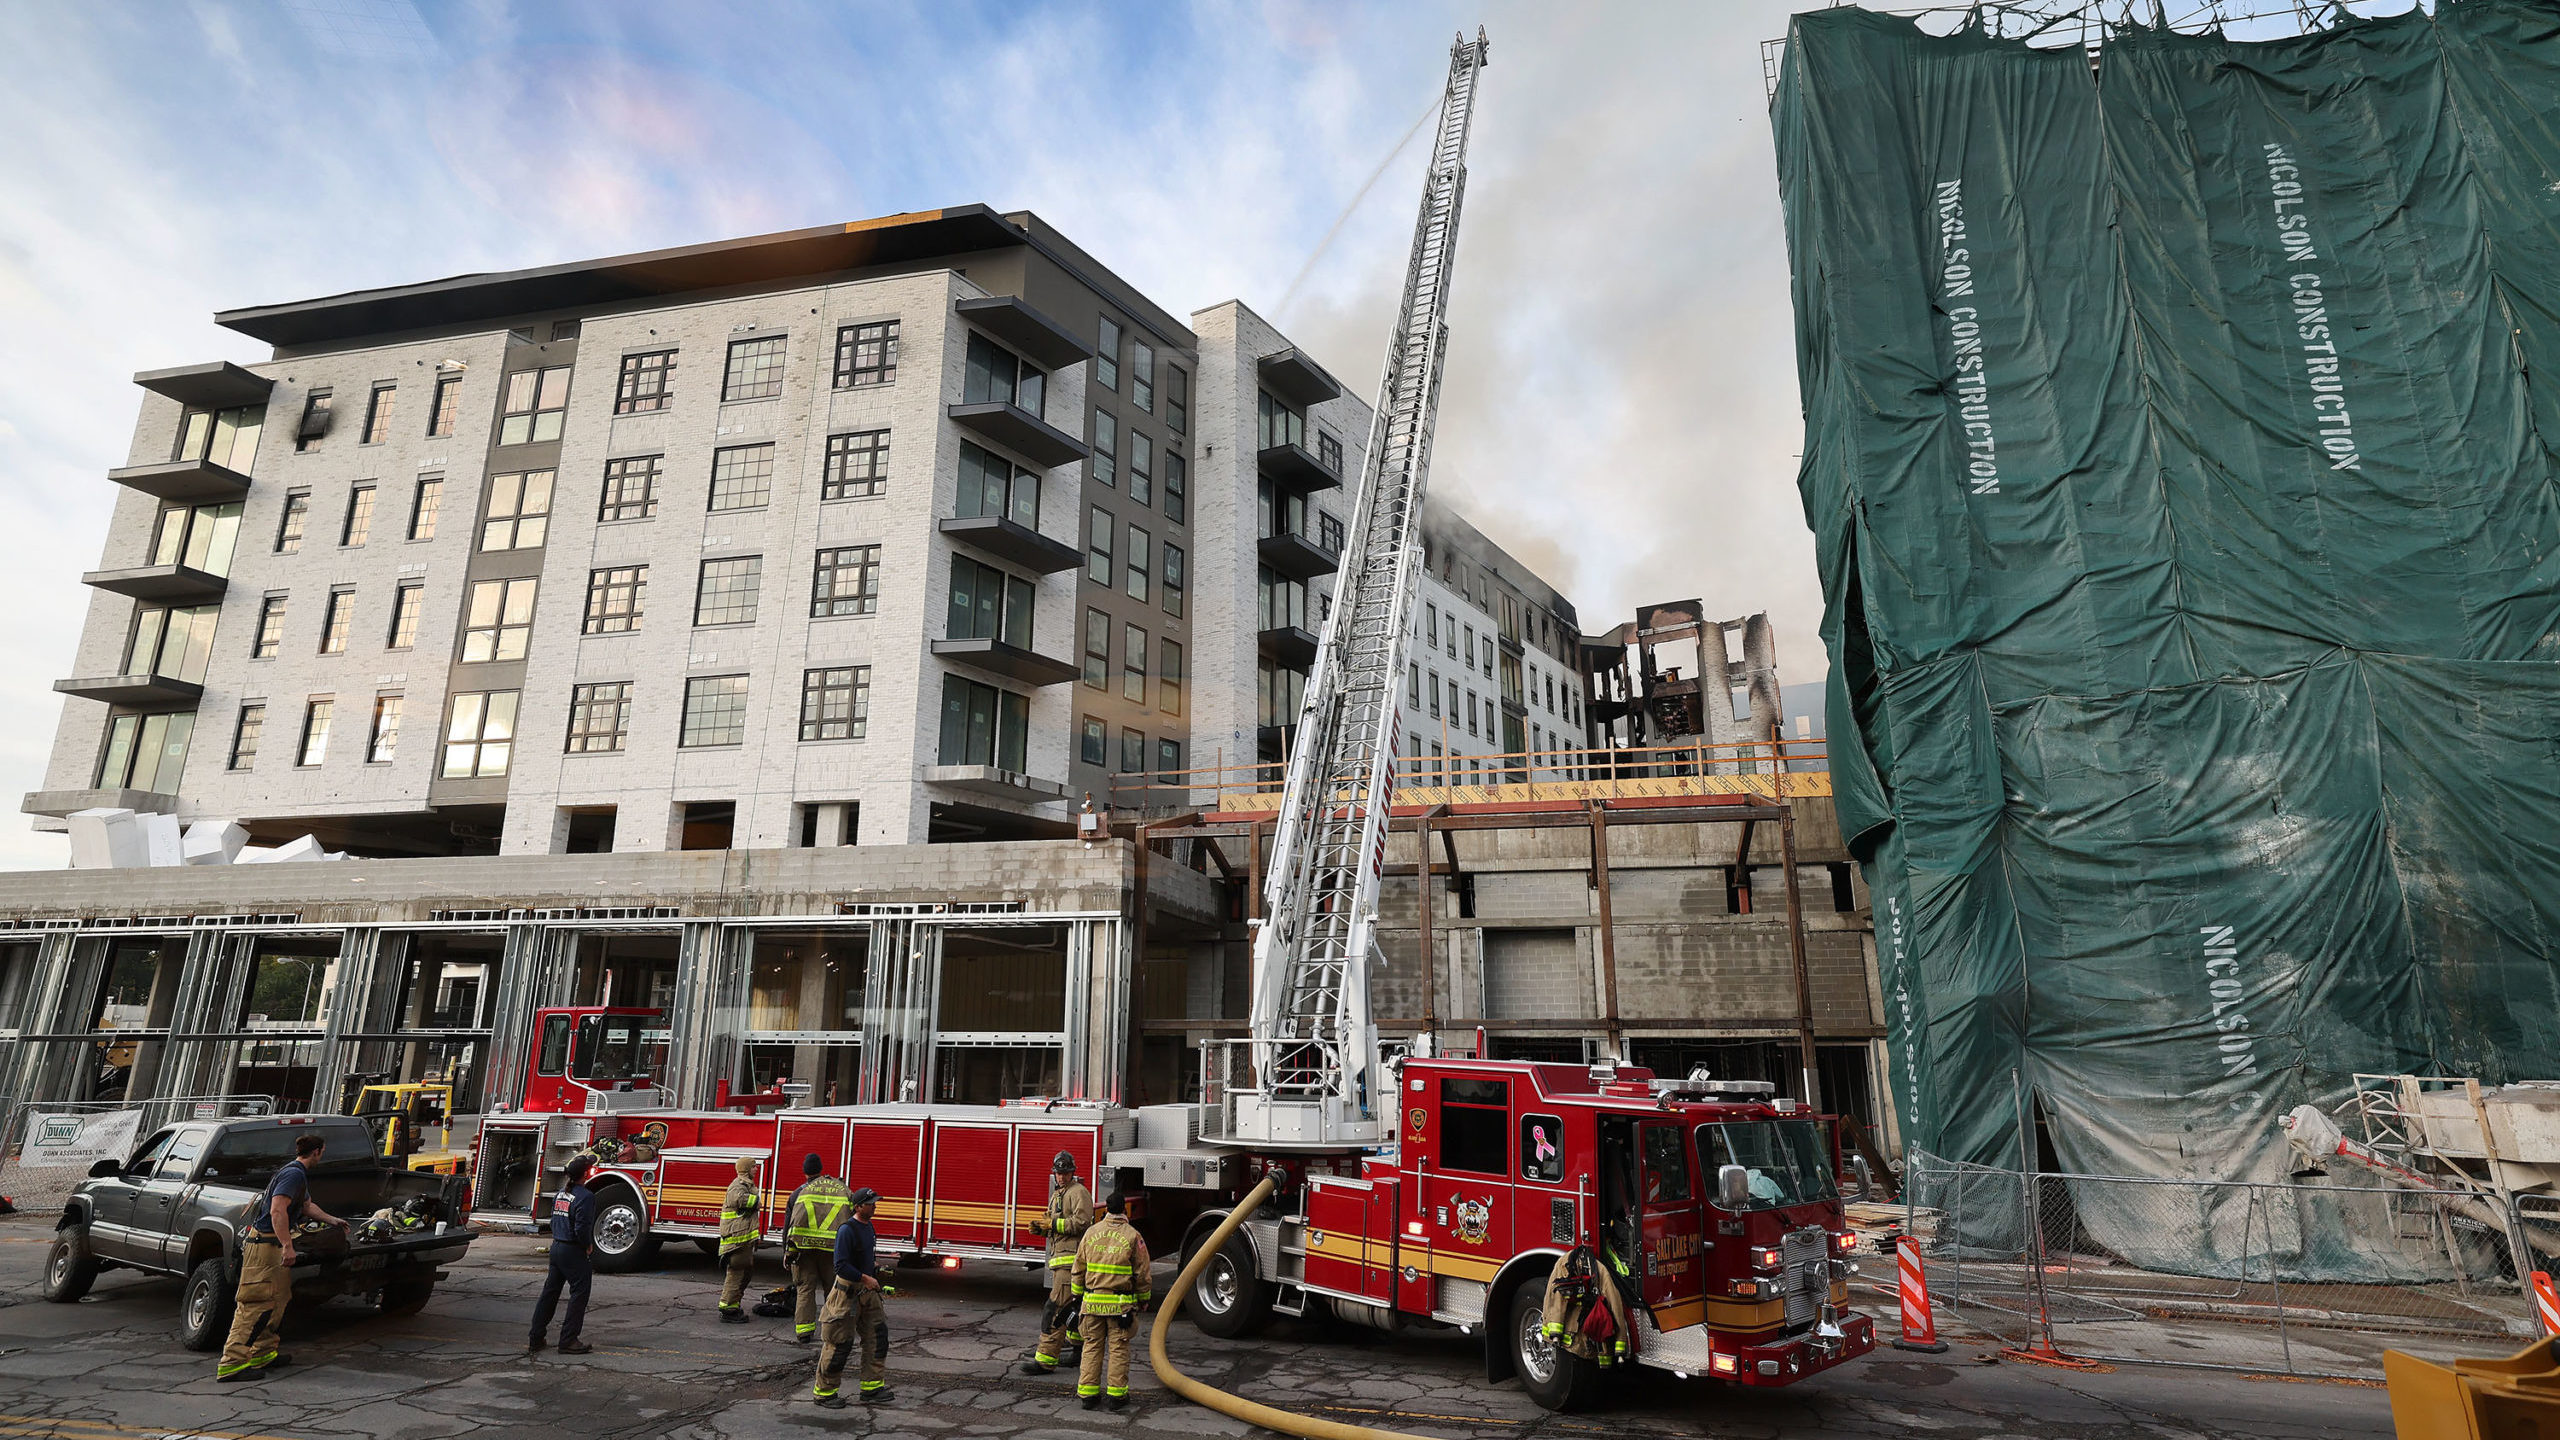 the apartment building next to the site the sugar house fire took place...